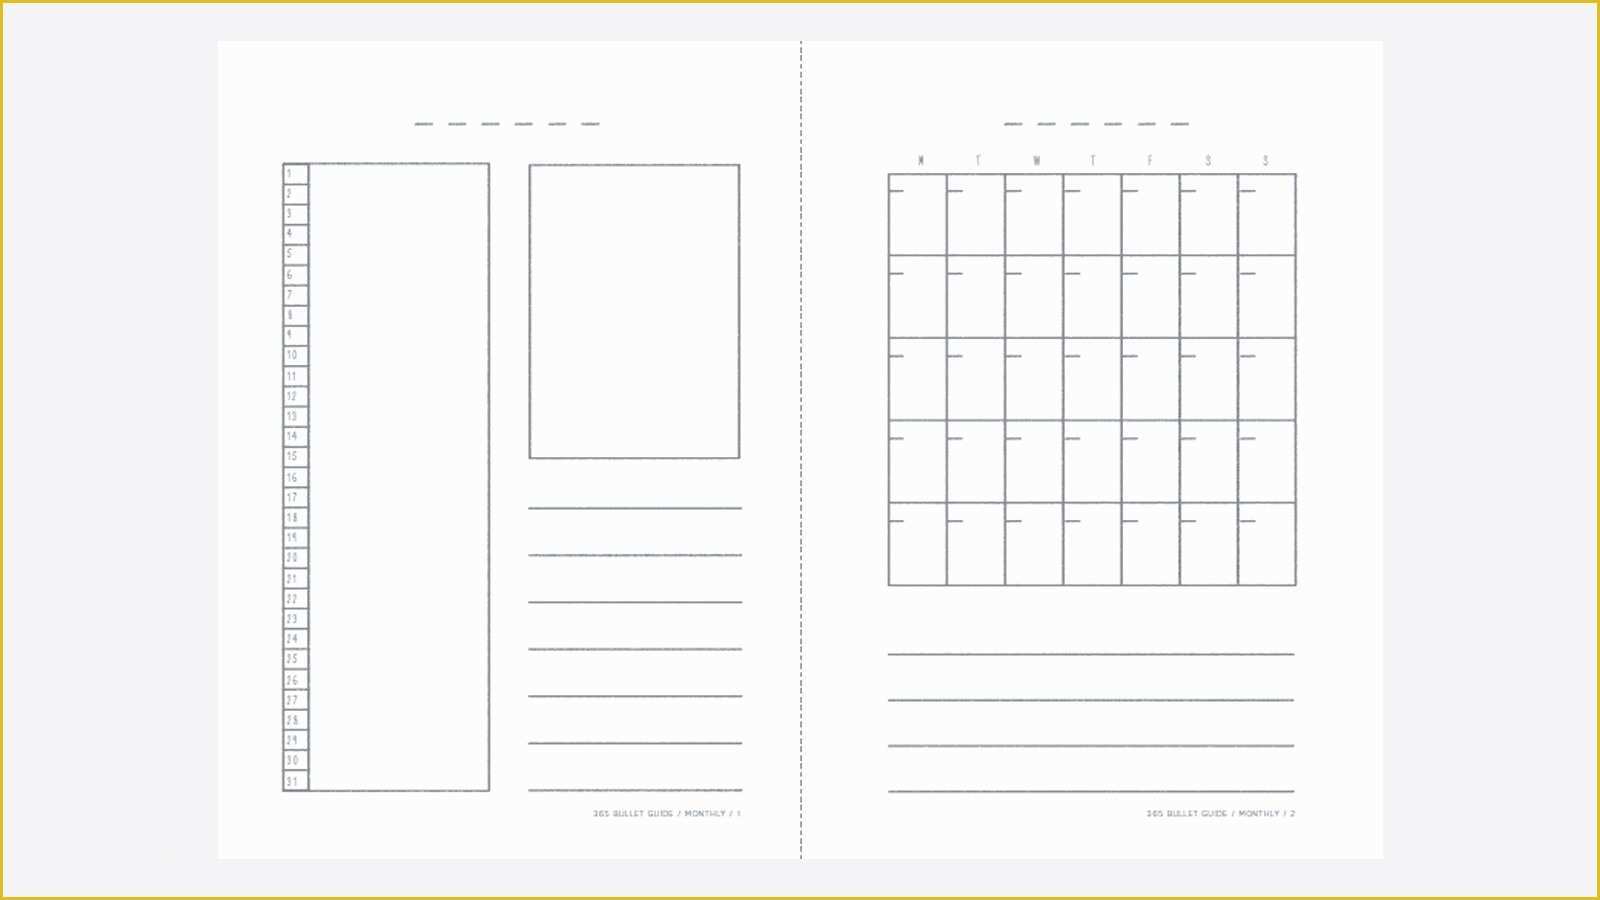 Free Bullet Journal Templates Of Print these Bullet Journal Diary Templates for 2018 Fro